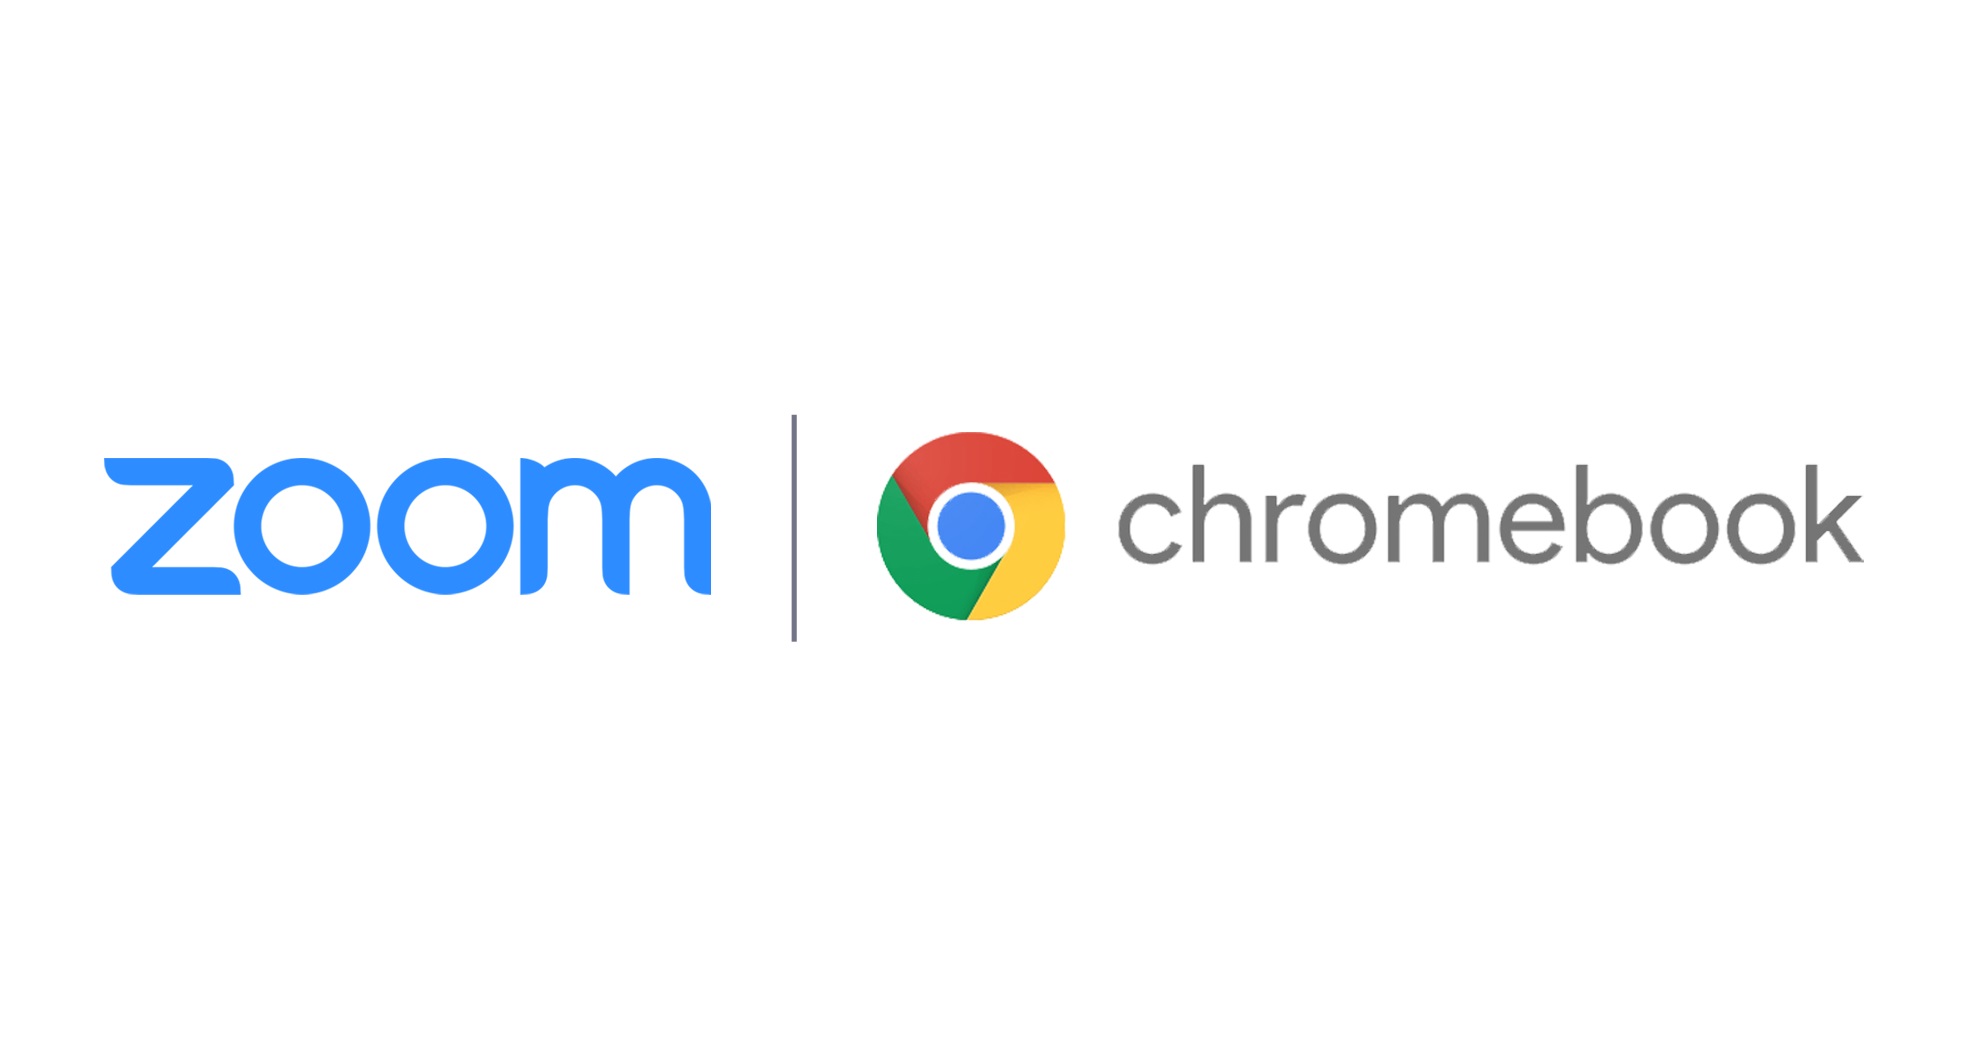 How to use Zoom on a Chromebook